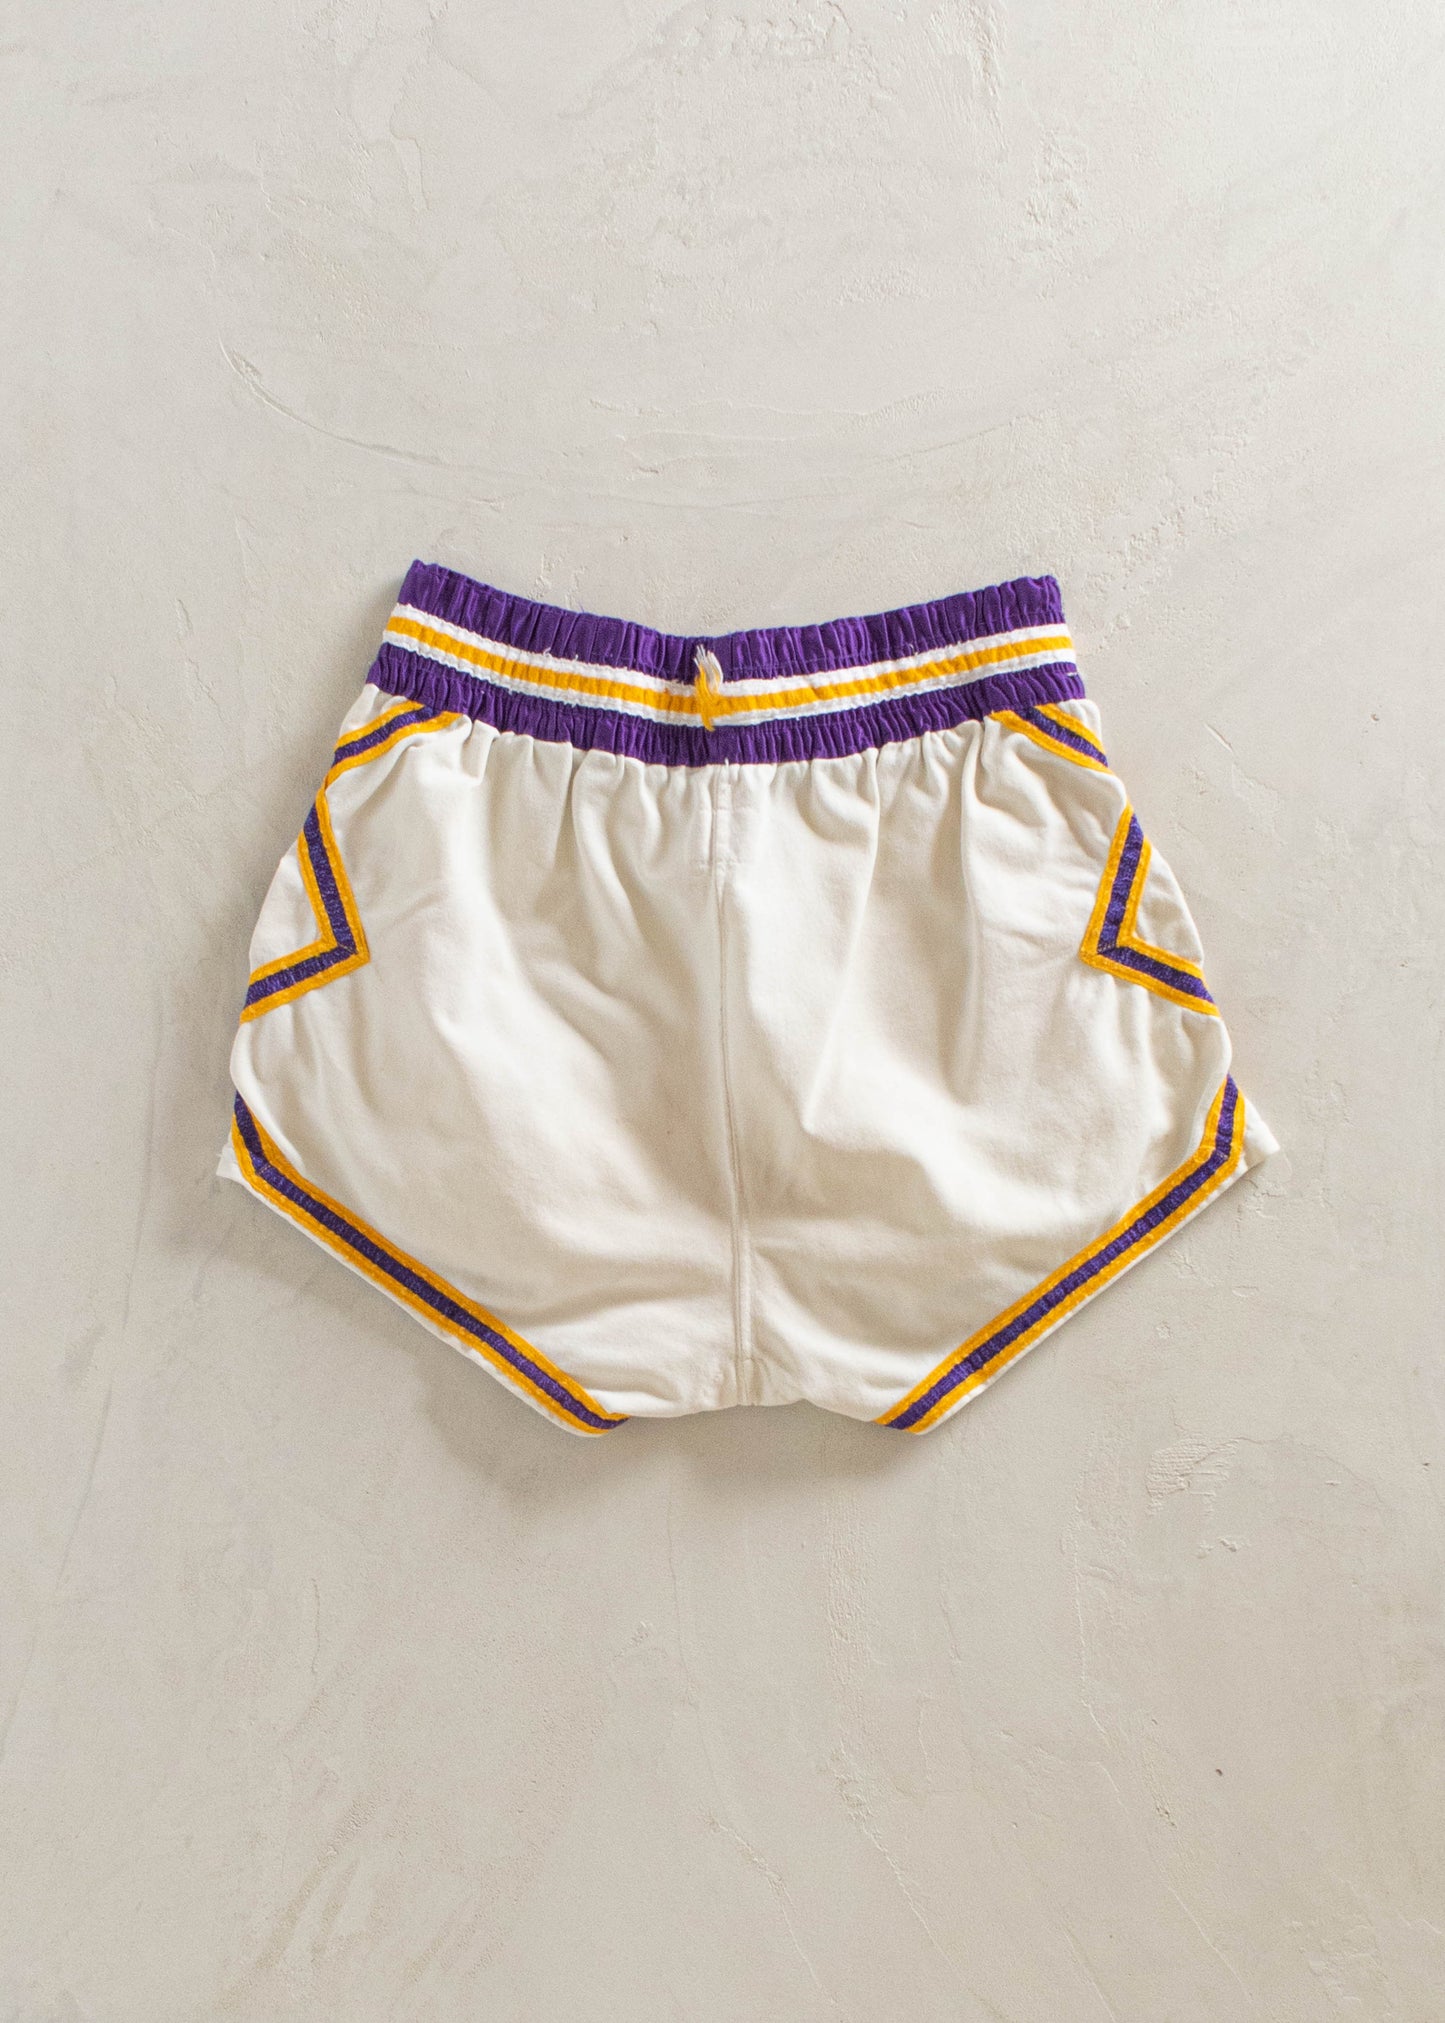 1960s Wilson Athletic Shorts Size XS/S